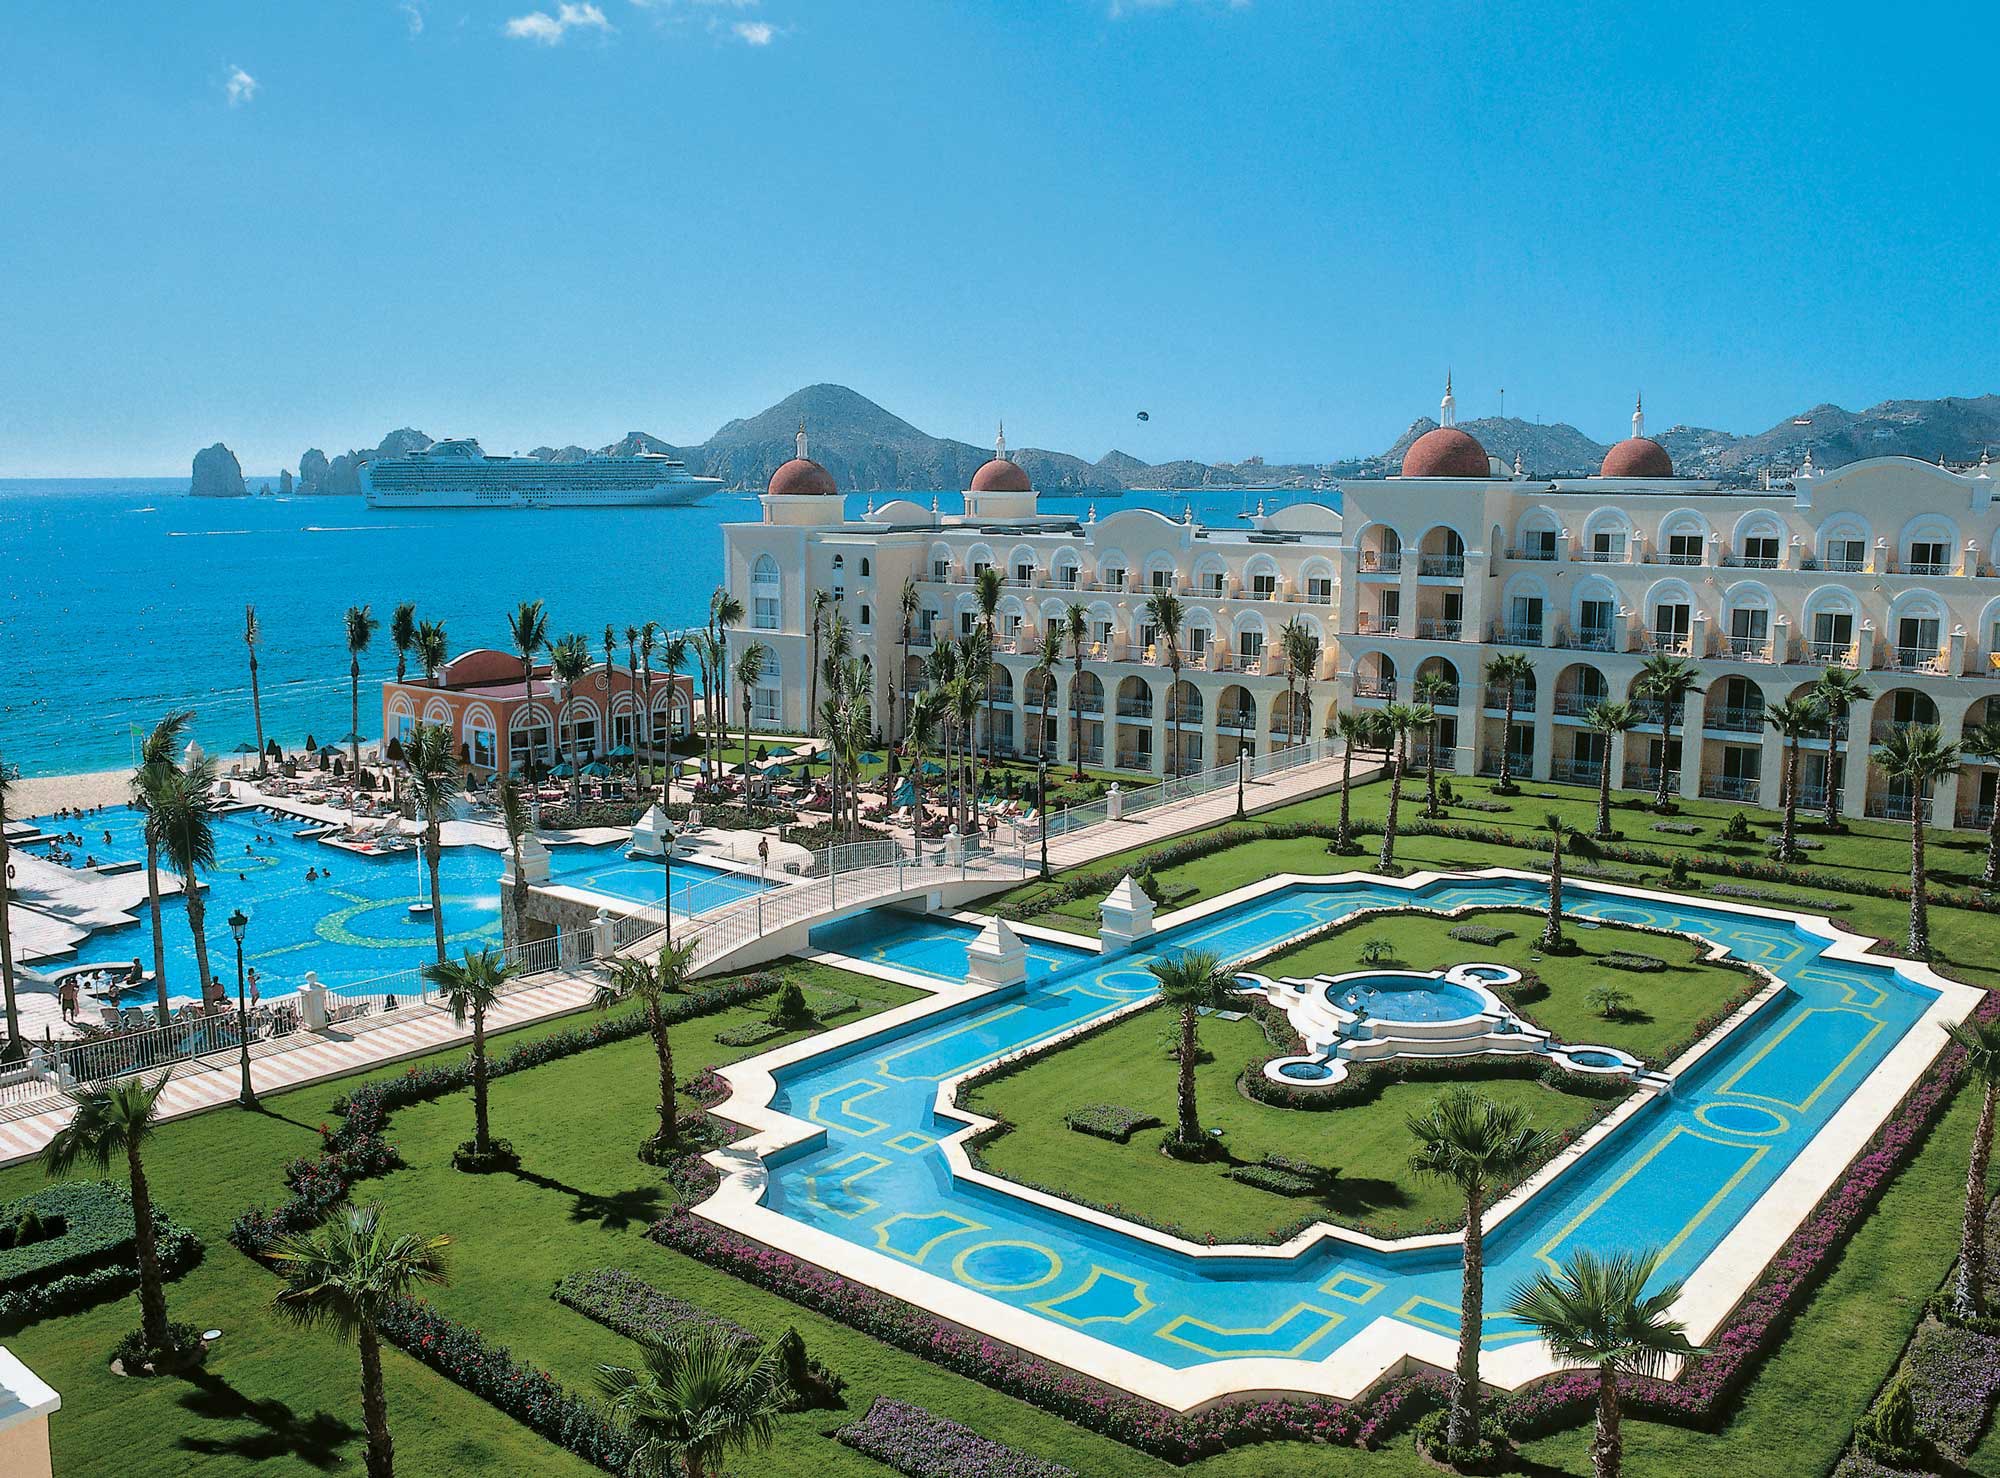 All-inclusive Honeymoon Packages | Best All Inclusive Resorts for a Honeymoon: Riu Palace Cabo San Lucas